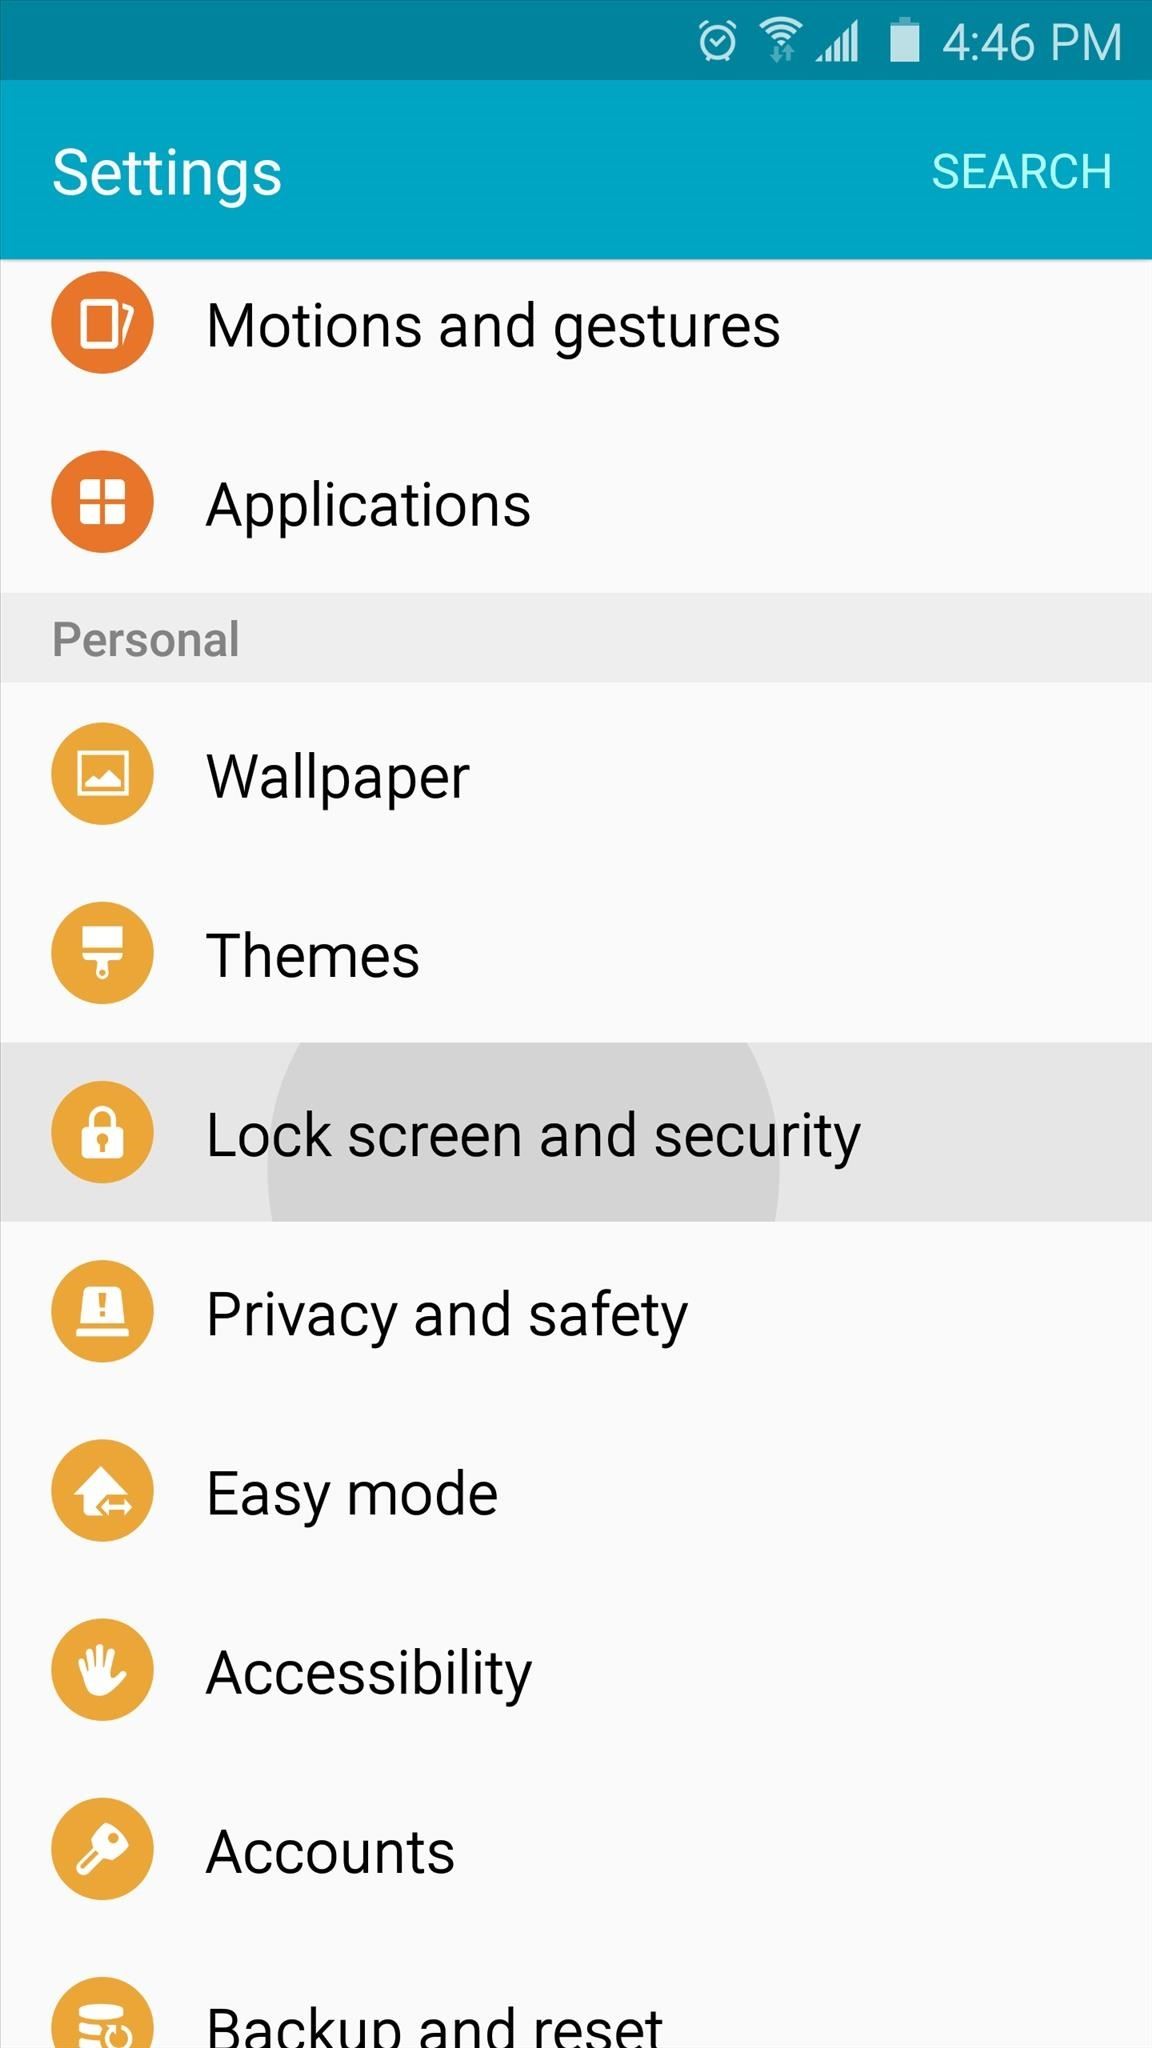 Chọn Lock screen and security